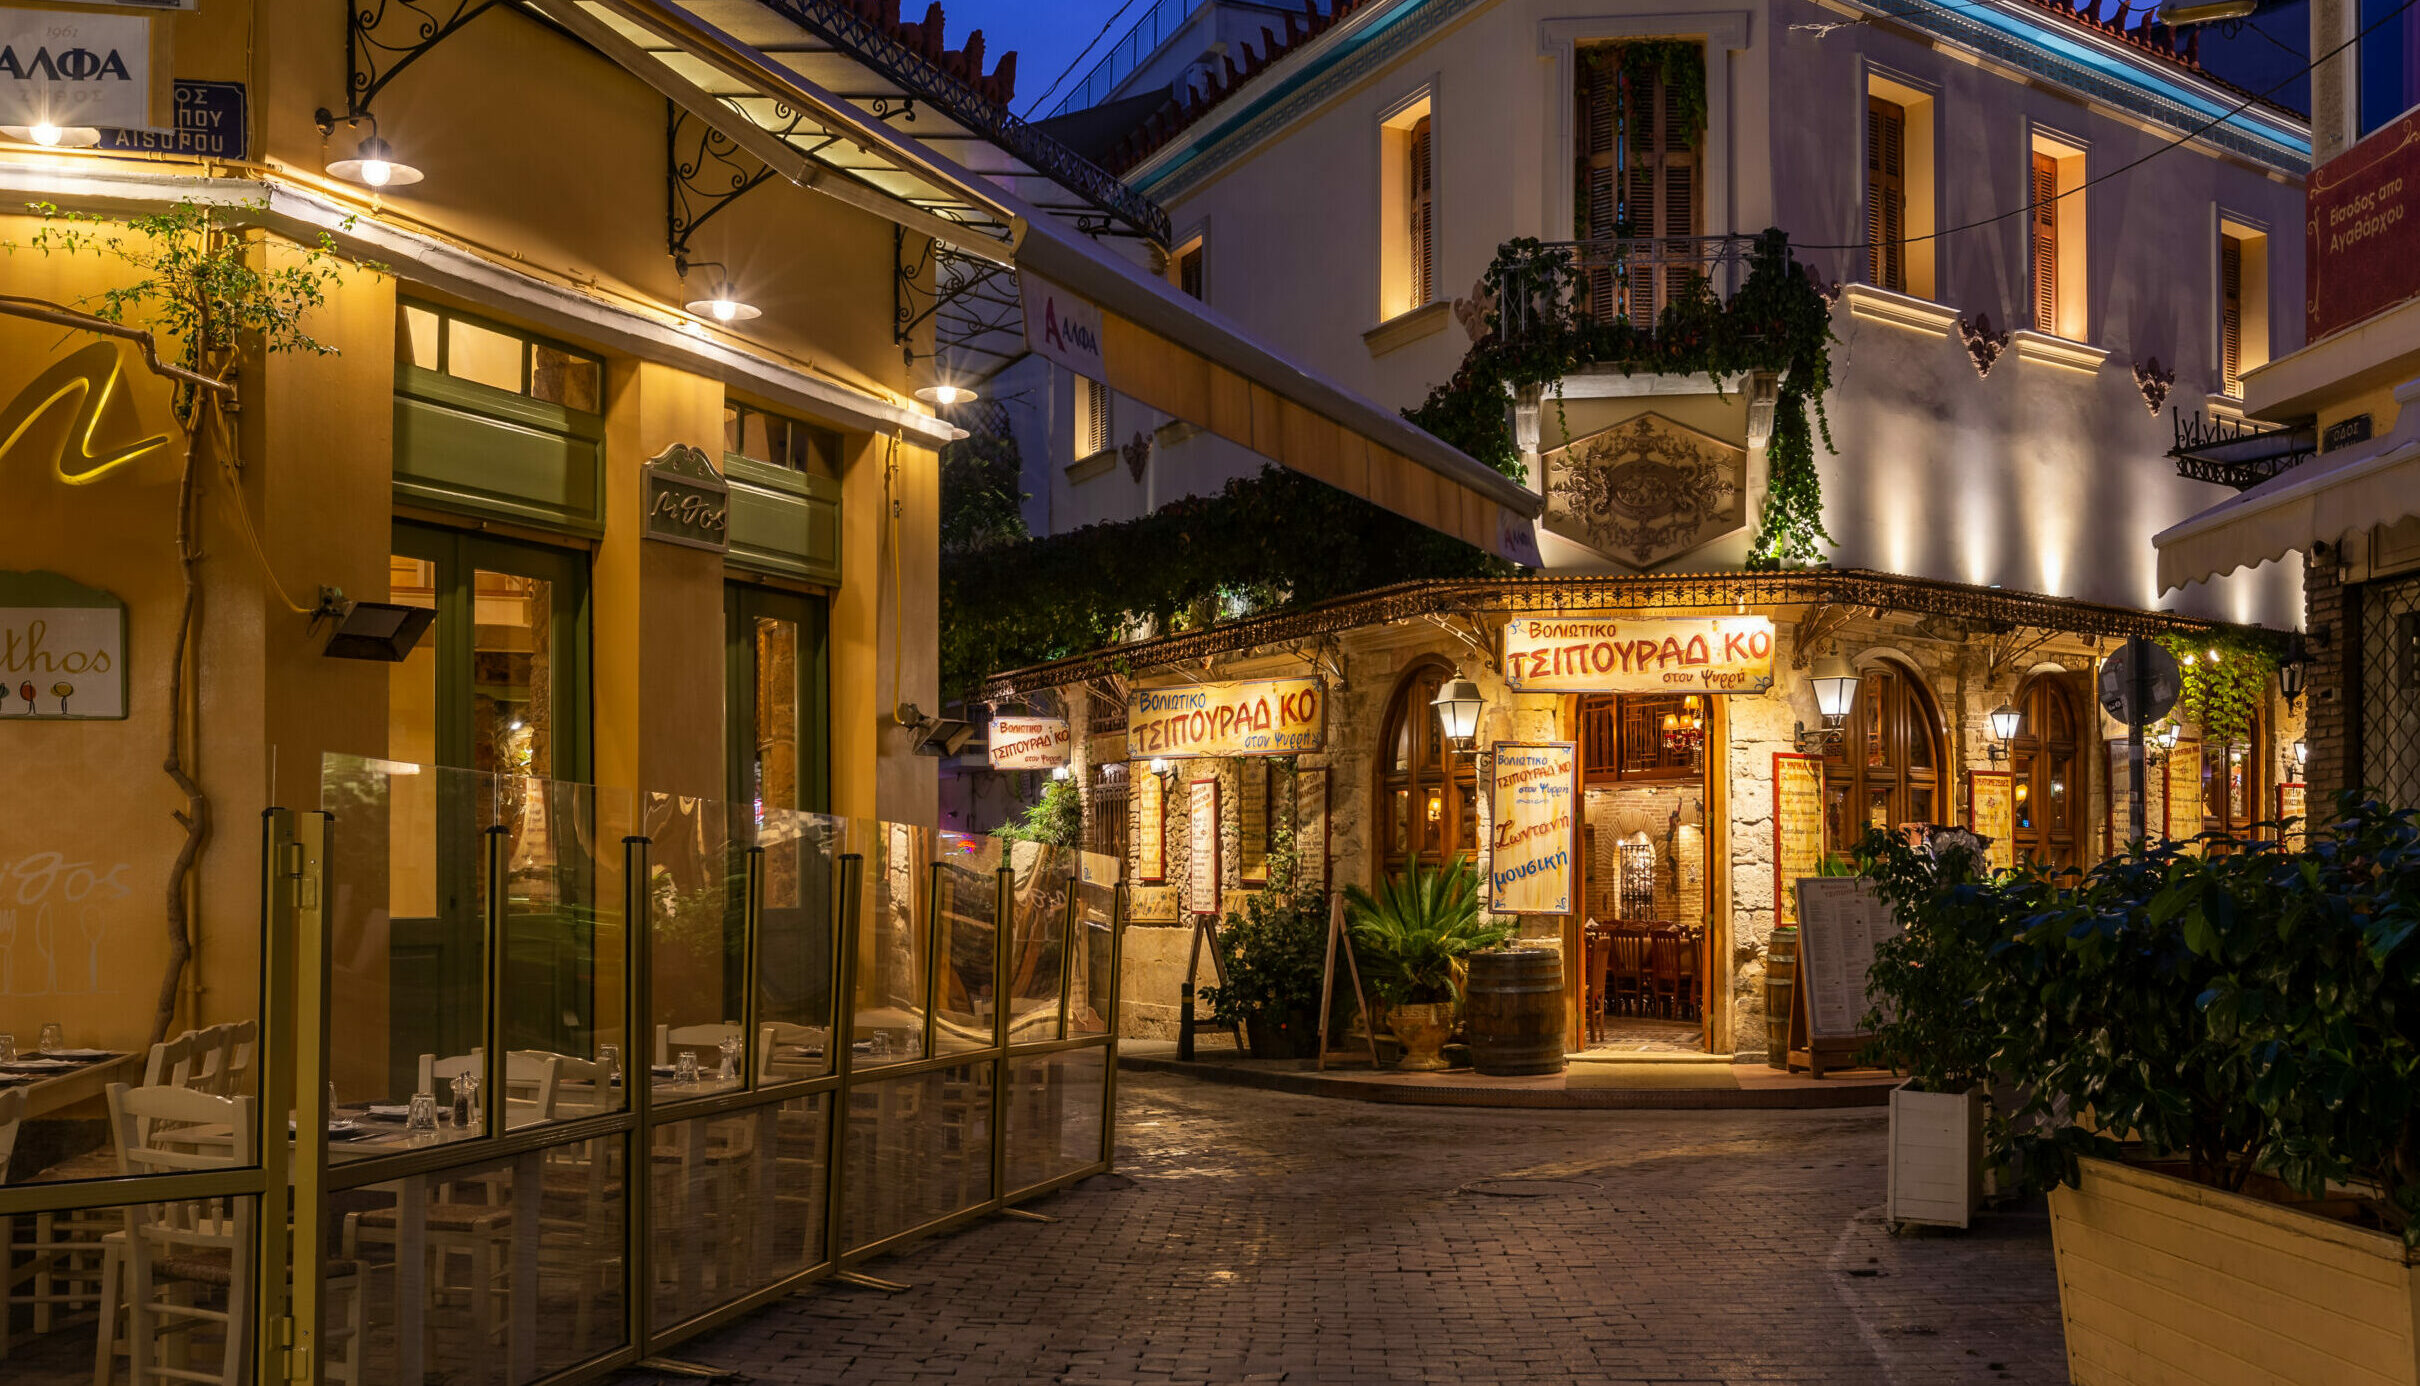 Athens: a stroll to Psyrri, a quaint corner of the city center